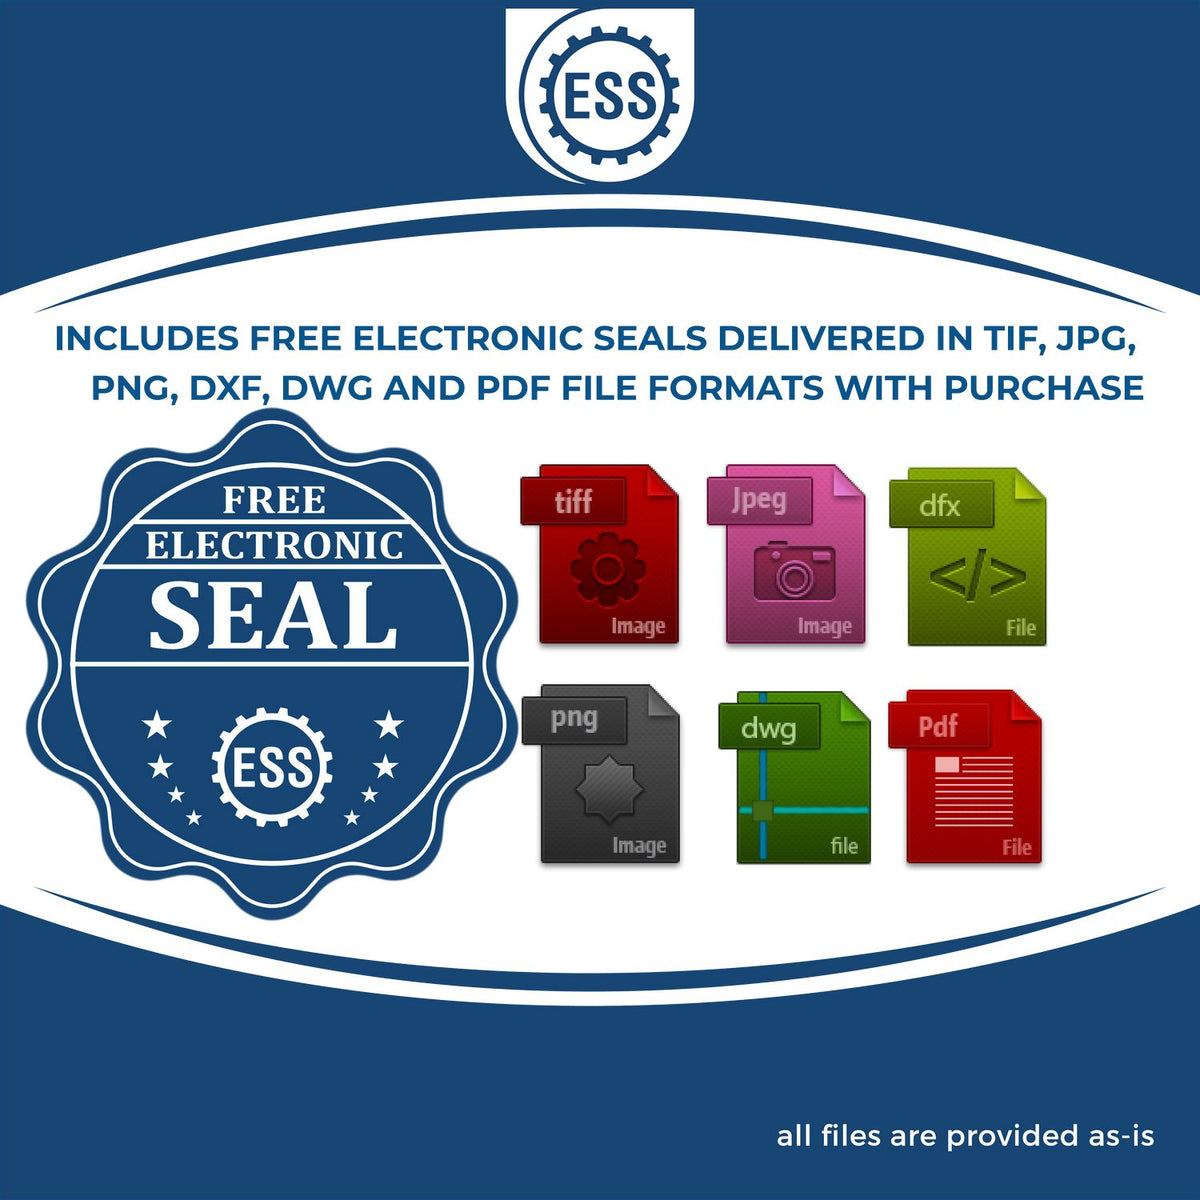 An infographic for the free electronic seal for the Alaska Engineer Desk Seal illustrating the different file type icons such as DXF, DWG, TIF, JPG and PNG.